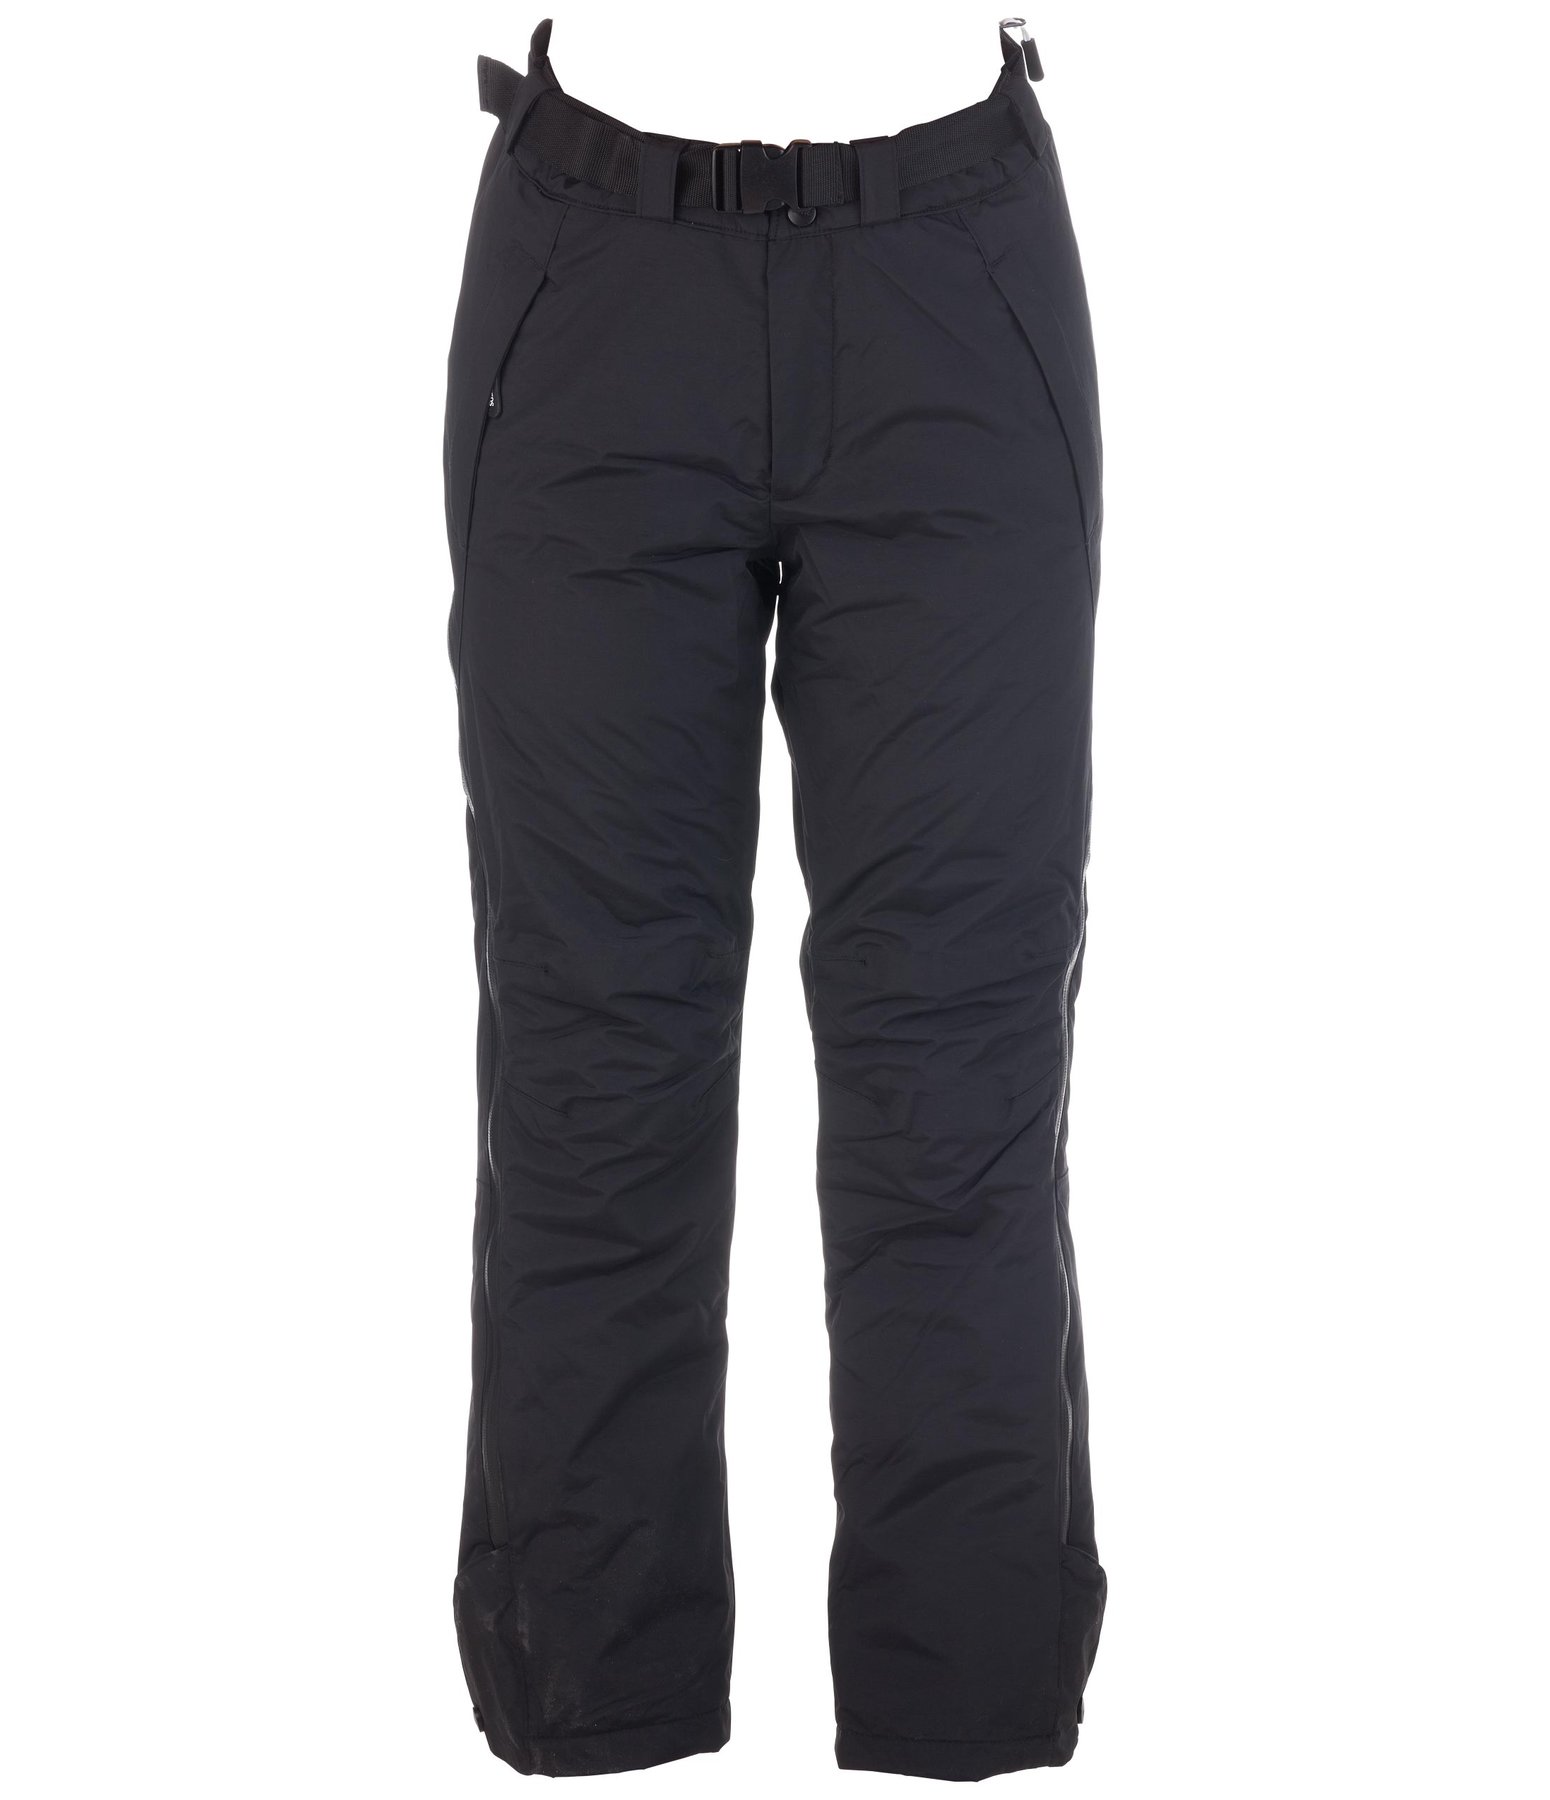 Children's Thermal Riding Overtrousers - Kramer Equestrian